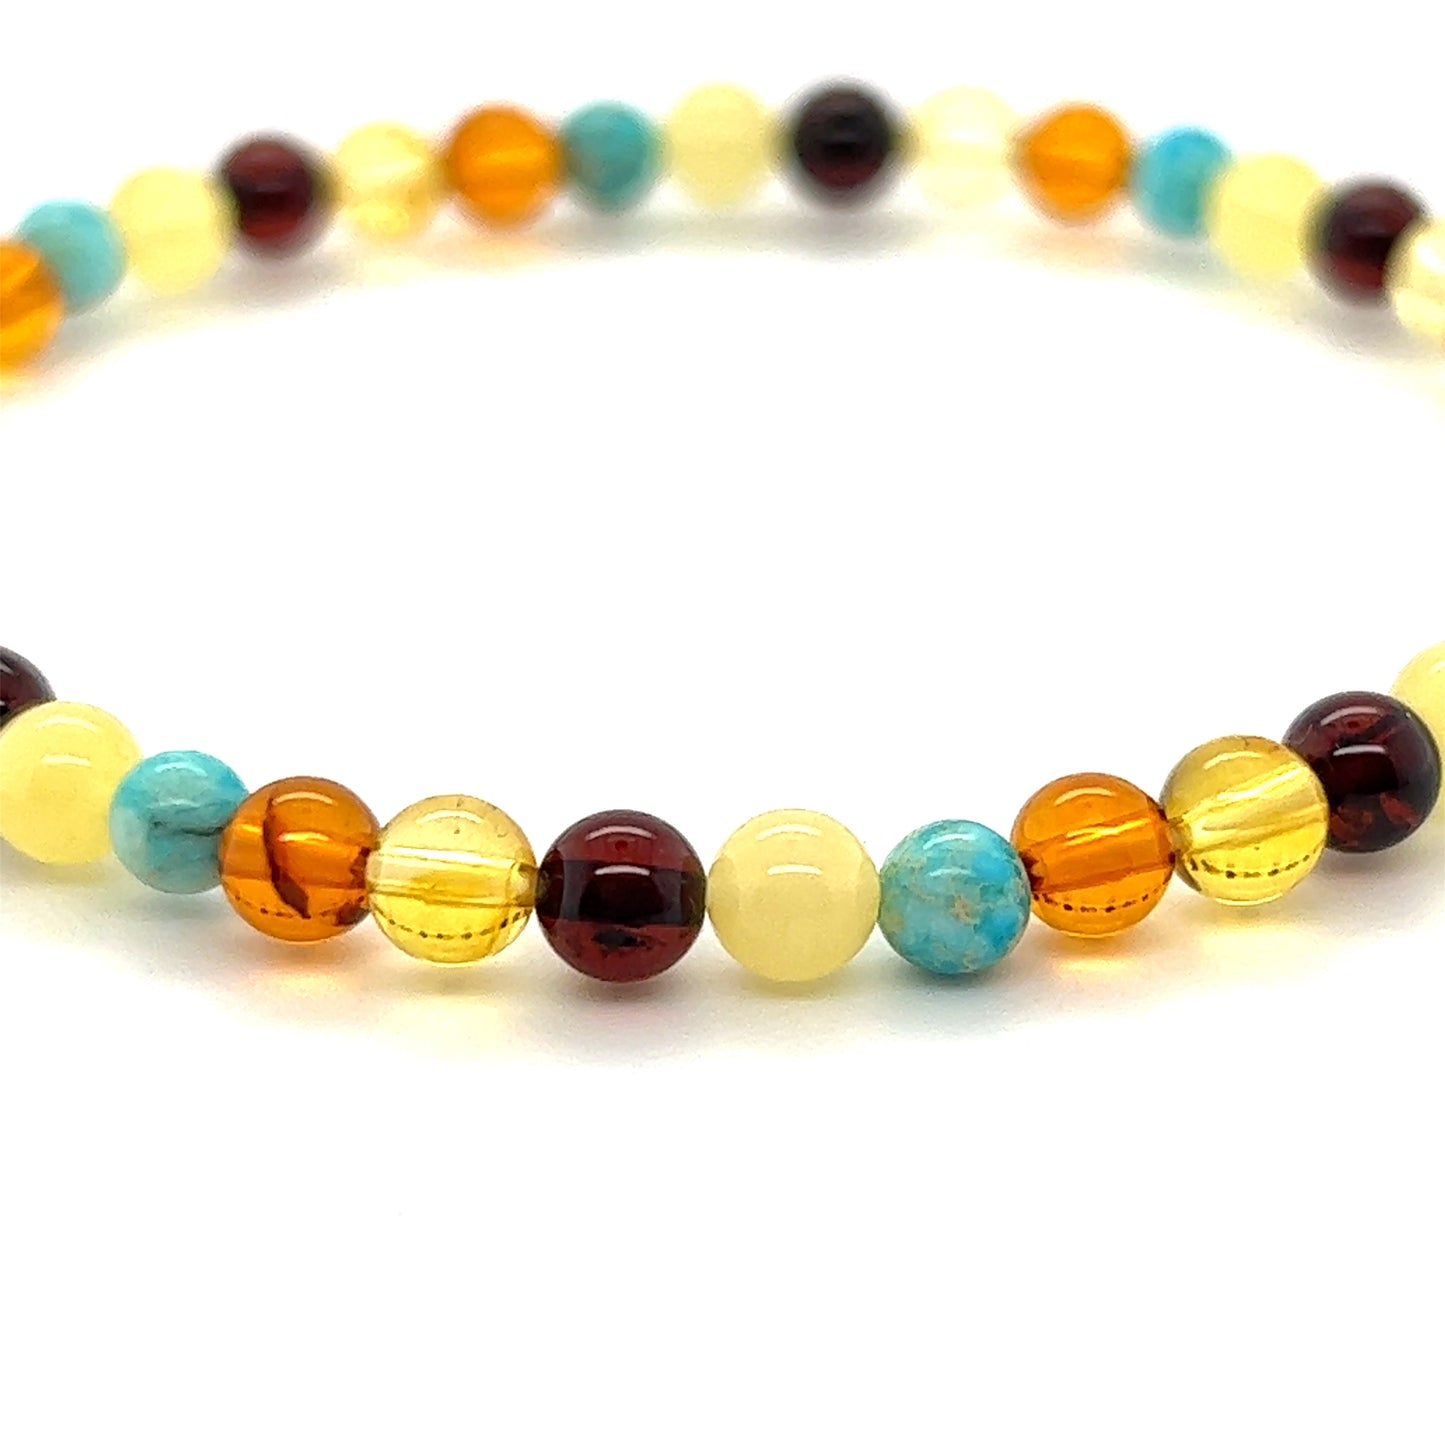 A Multicolored Amber Beaded Bracelet with Turquoise beads by Super Silver.